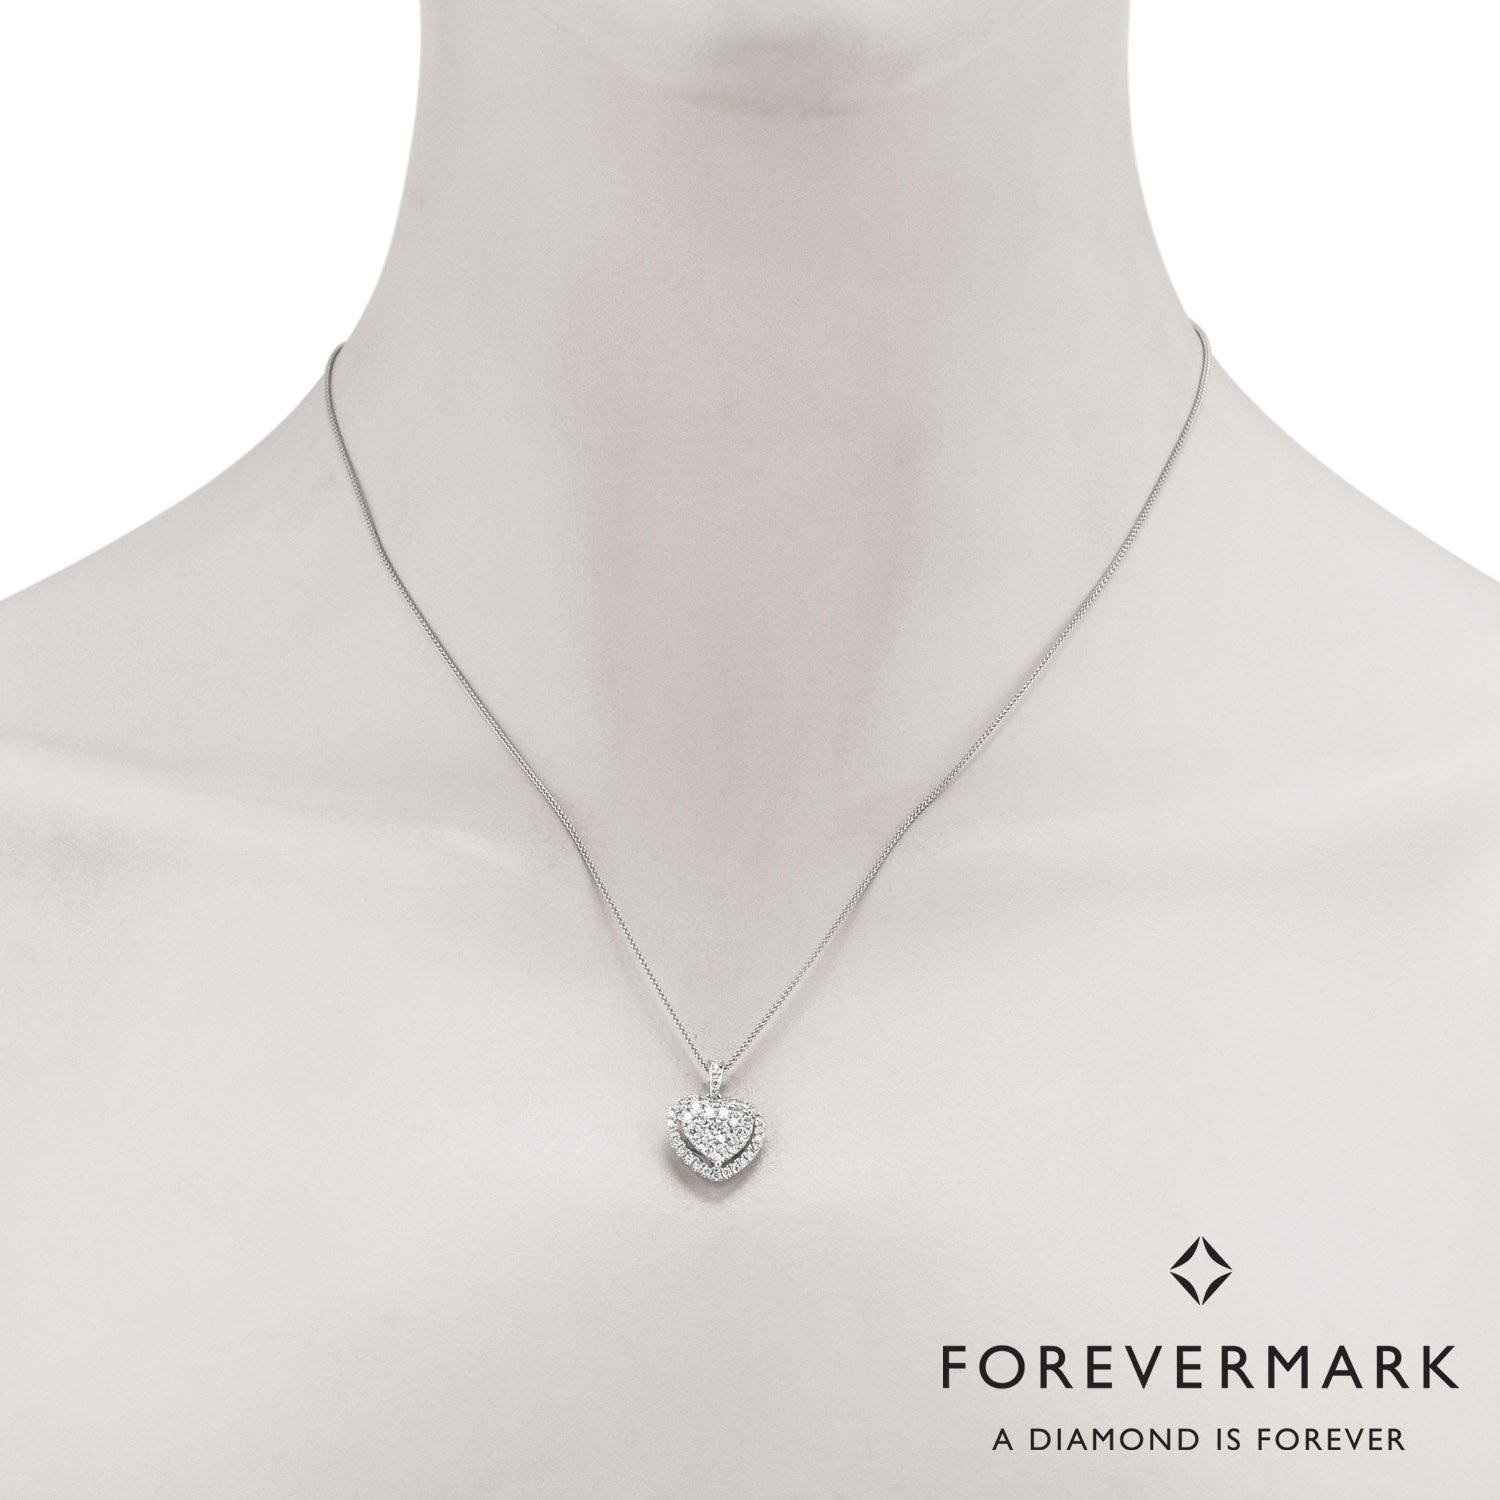 De Beers Forevermark Diamond Heart Necklace in 18kt White Gold (3/4ct tw)